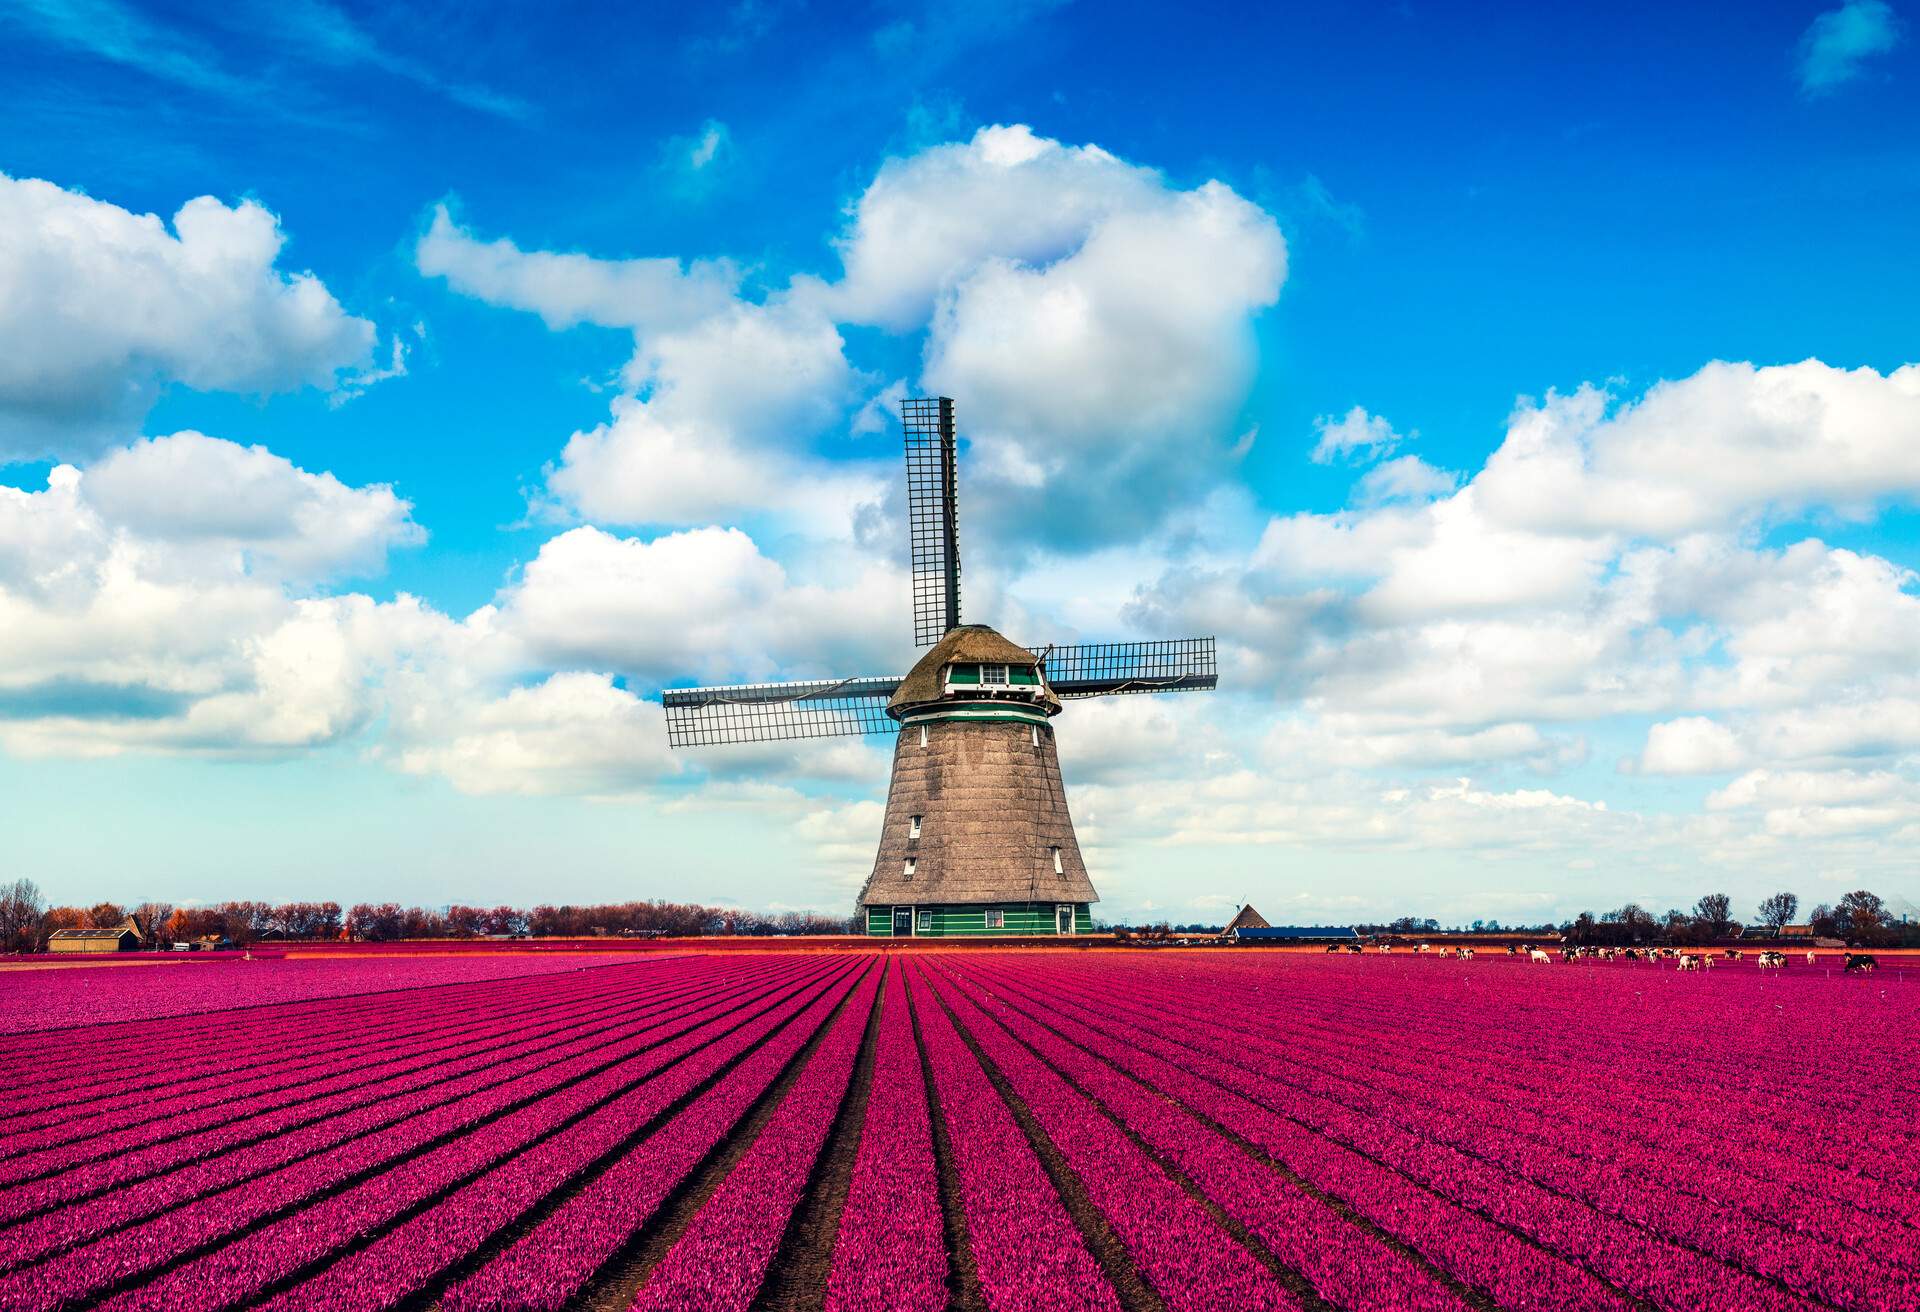 an old windmill in the middle of a pink tulip flower field